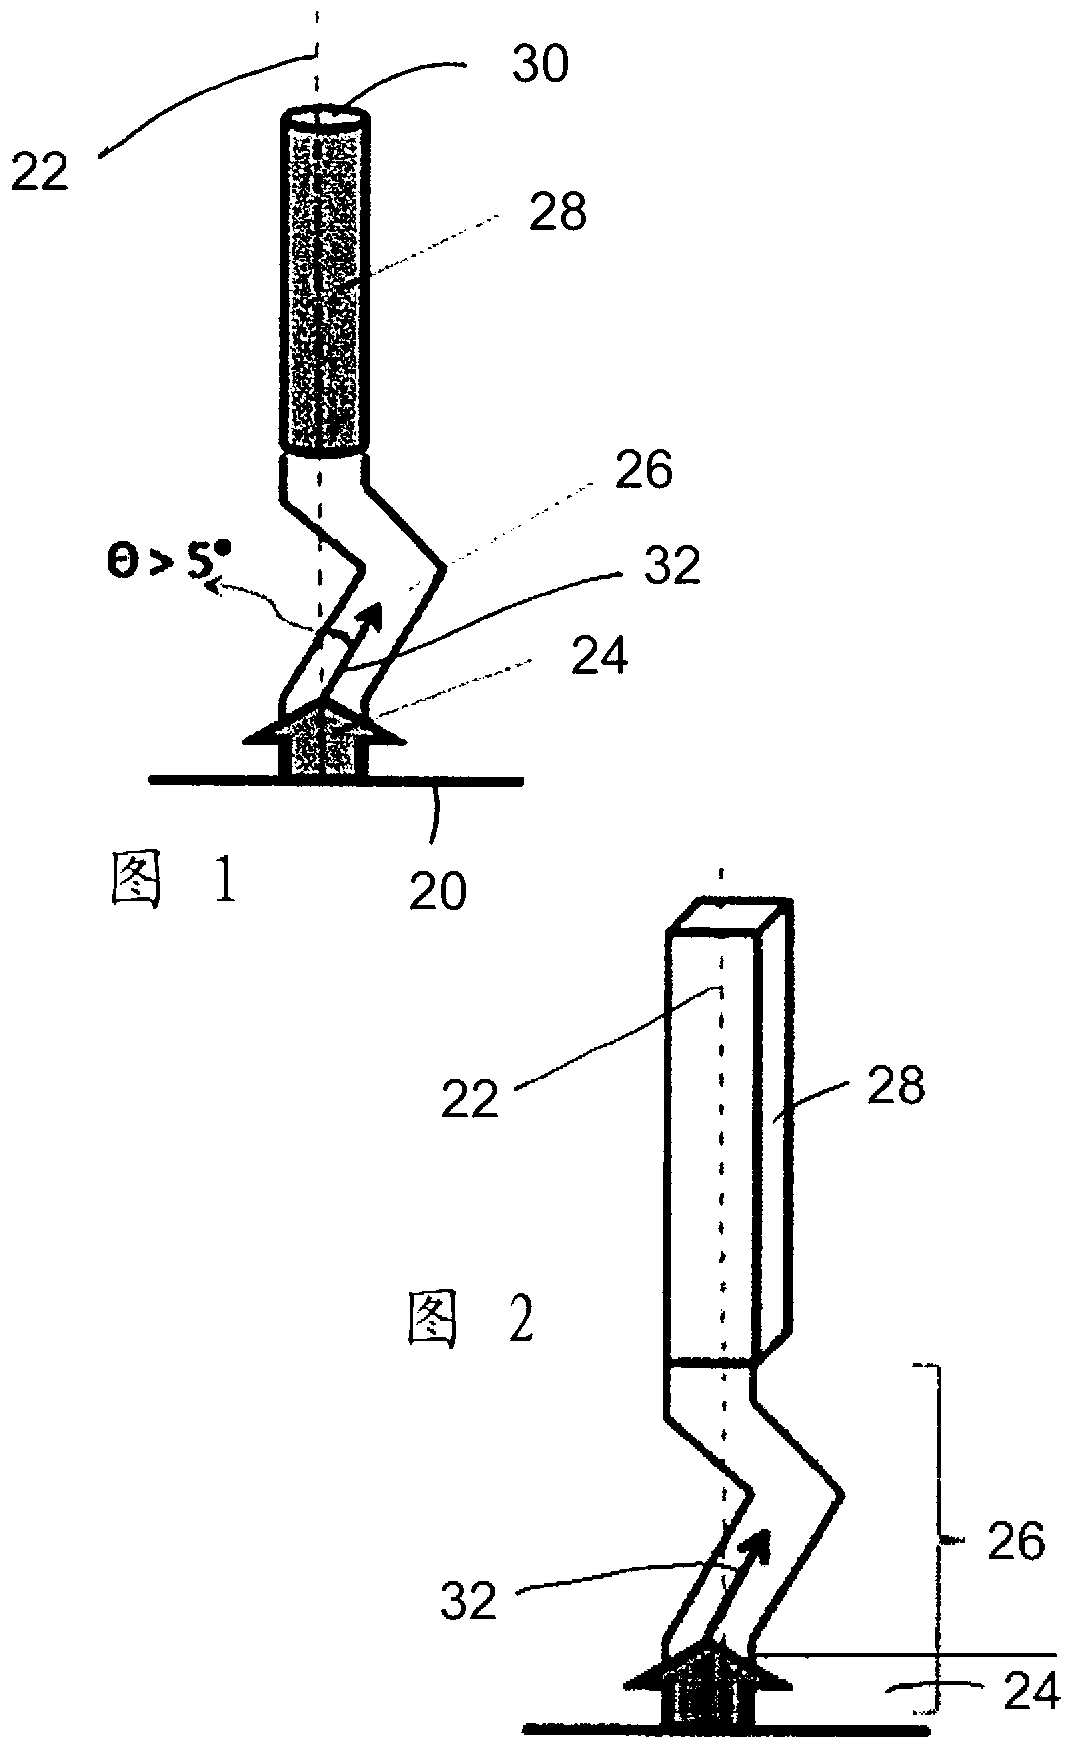 Method for producing a monocrystalline body from a magnetic shape memory alloy